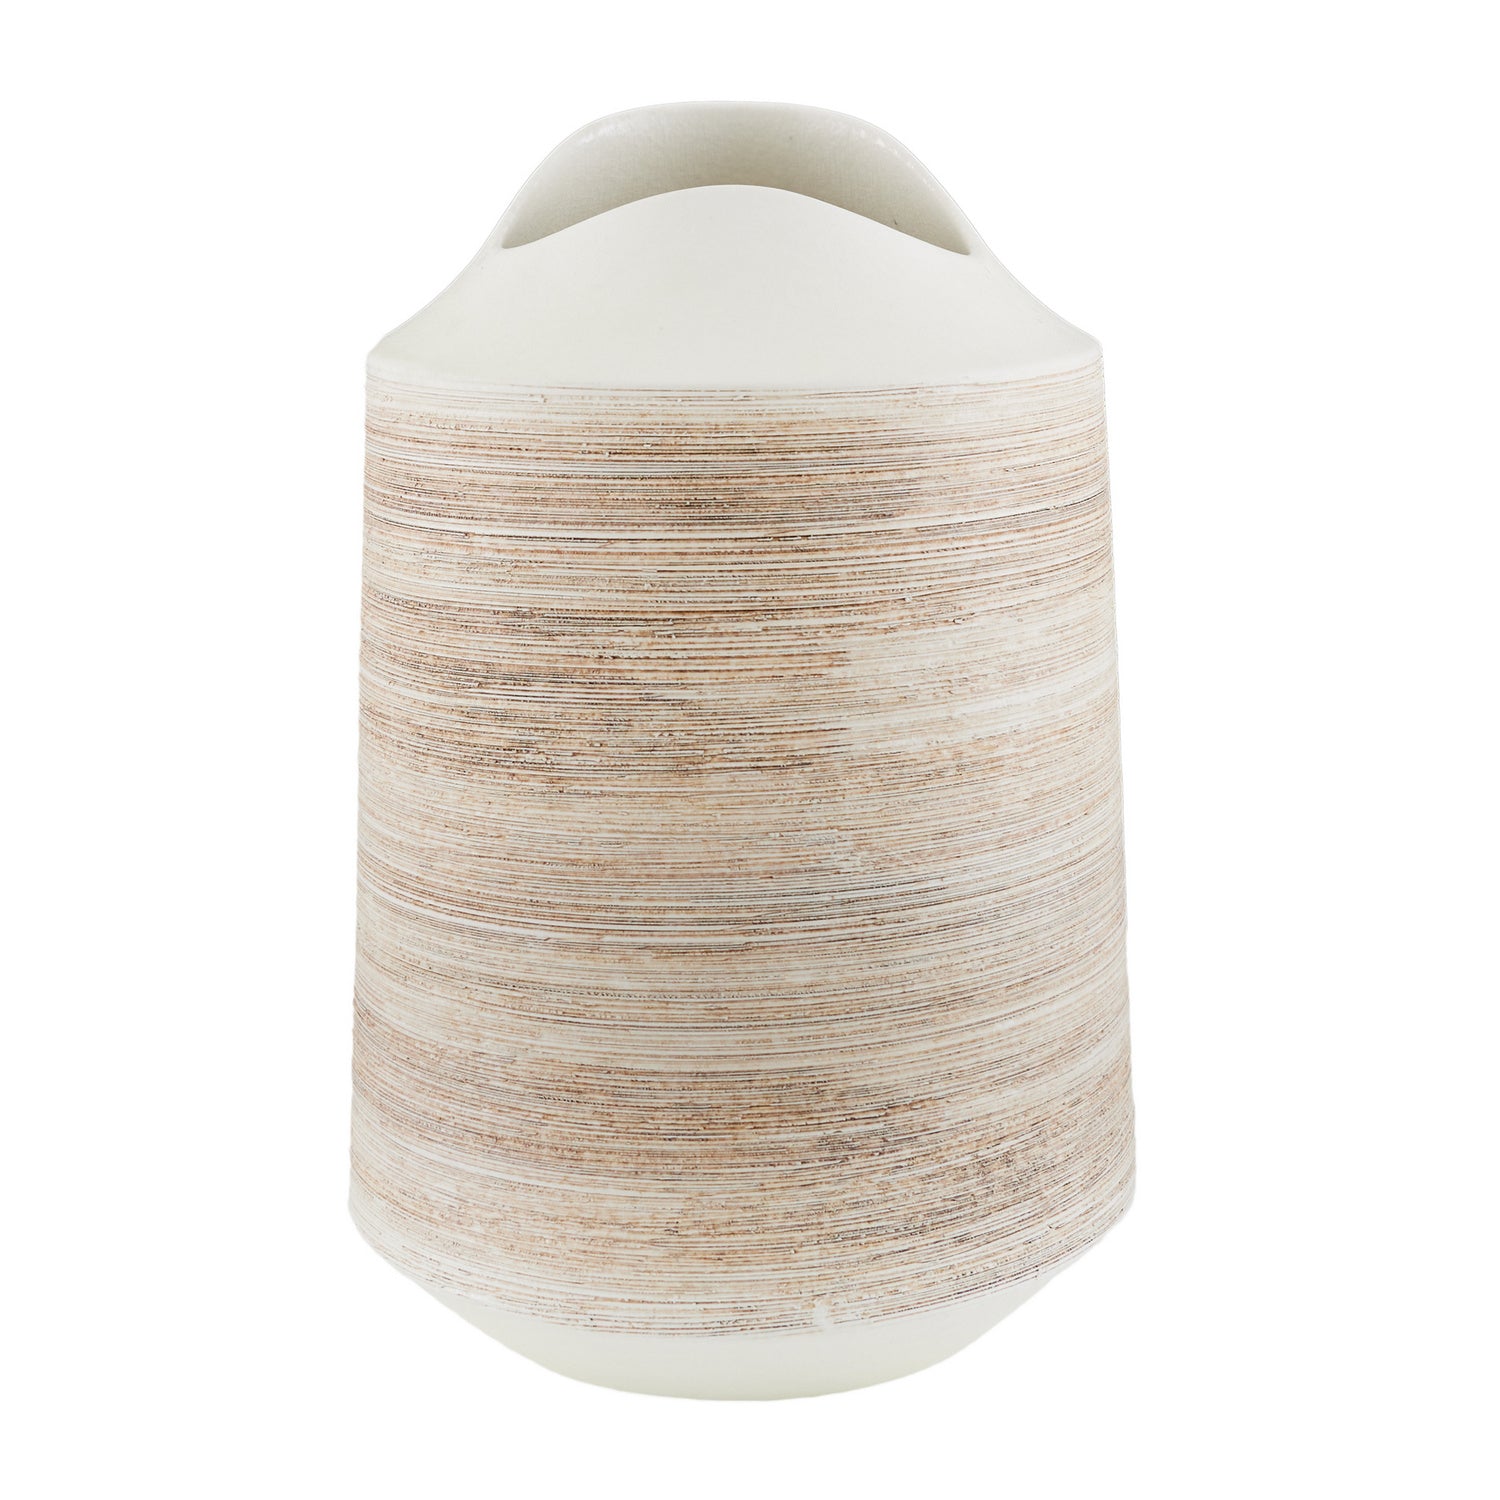 Vase from the Pueblo collection in Desert Sand finish